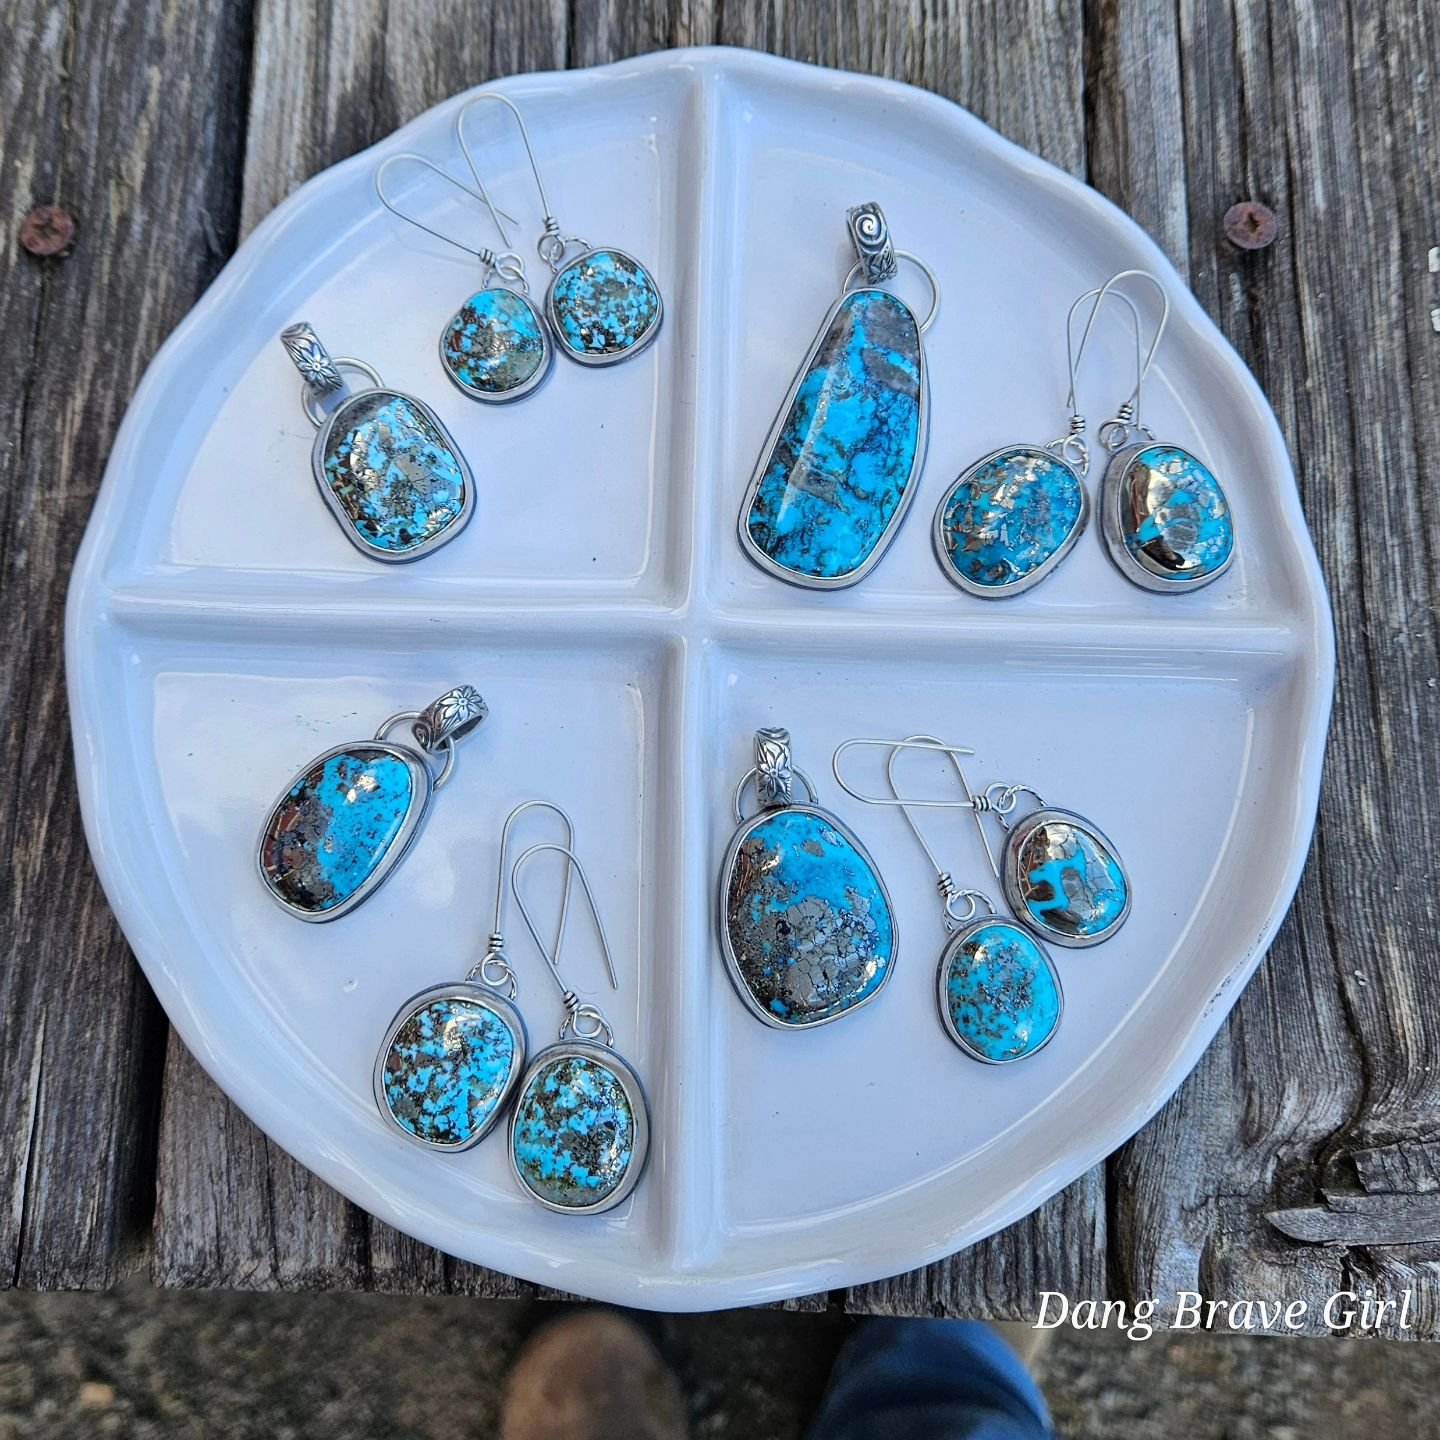 When a friend asks you to create custom sets for his wife and 3 daughters, you do it. He even brought me the turquoise he picked up the last time he was in Quartzsite.

All 4 sets have pendants and earrings made with Nacozari Turquoise, and just look